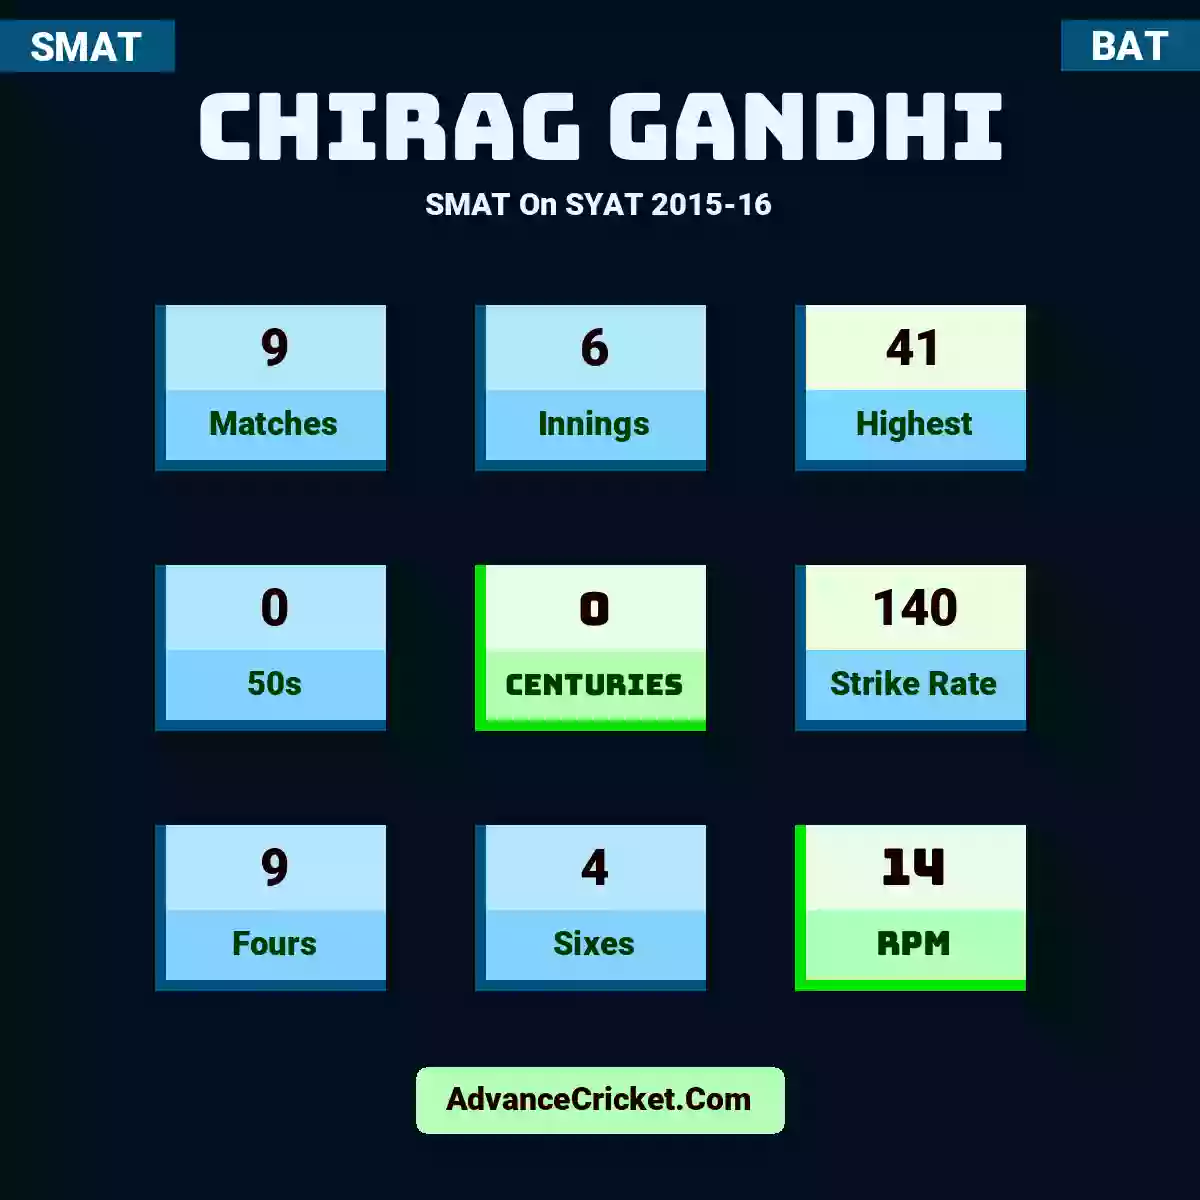 Chirag Gandhi SMAT  On SYAT 2015-16, Chirag Gandhi played 9 matches, scored 41 runs as highest, 0 half-centuries, and 0 centuries, with a strike rate of 140. C.Gandhi hit 9 fours and 4 sixes, with an RPM of 14.